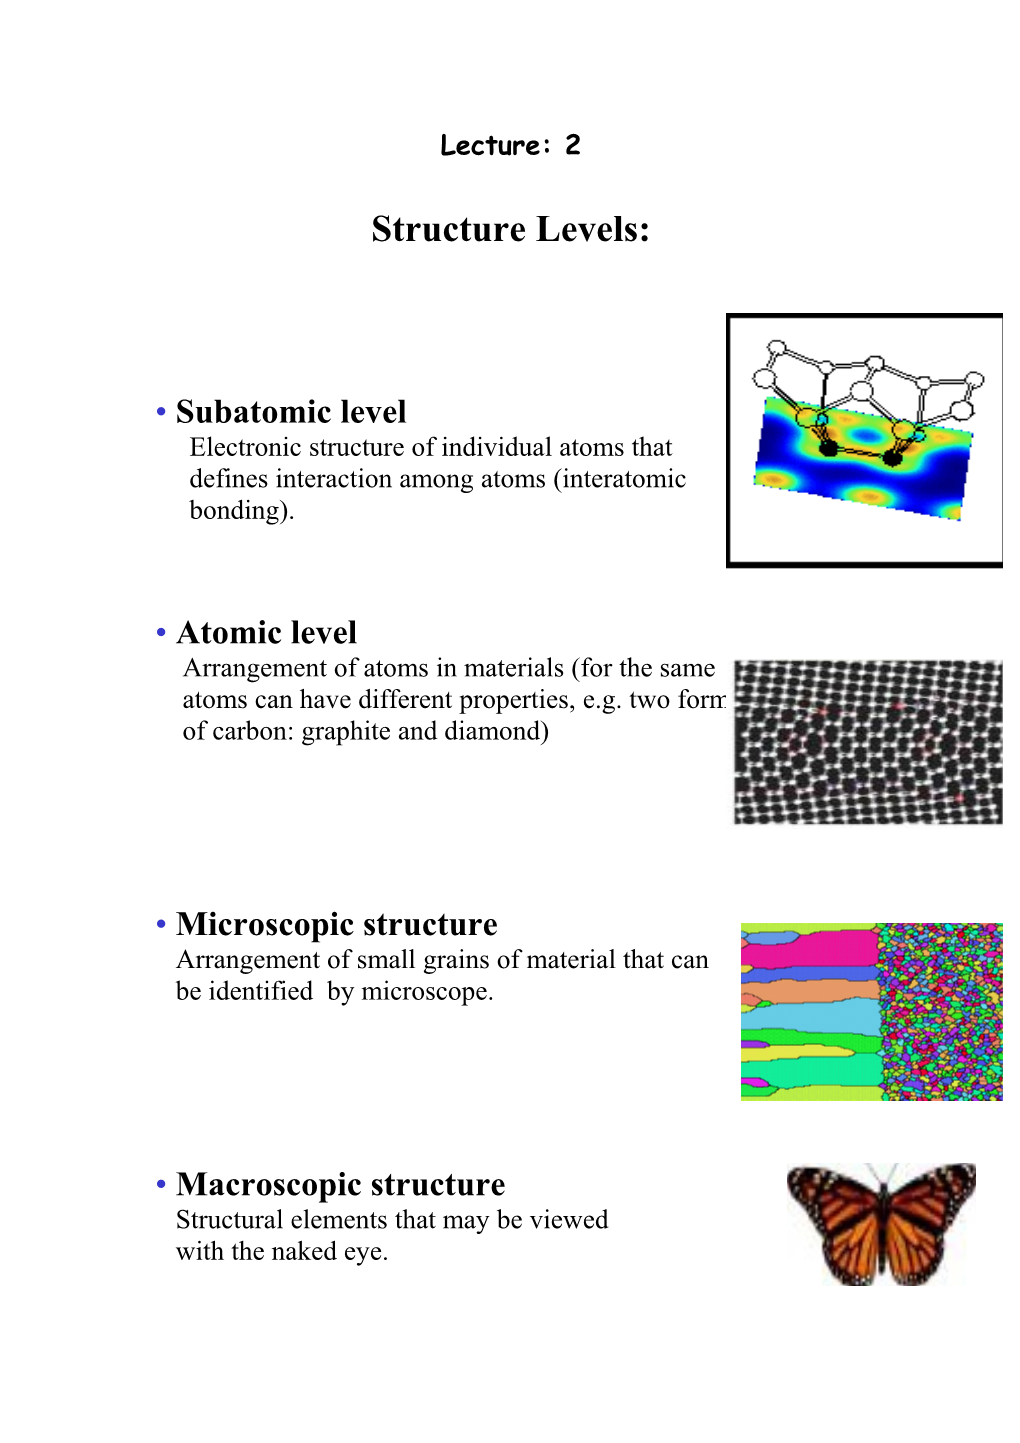 Structure Levels